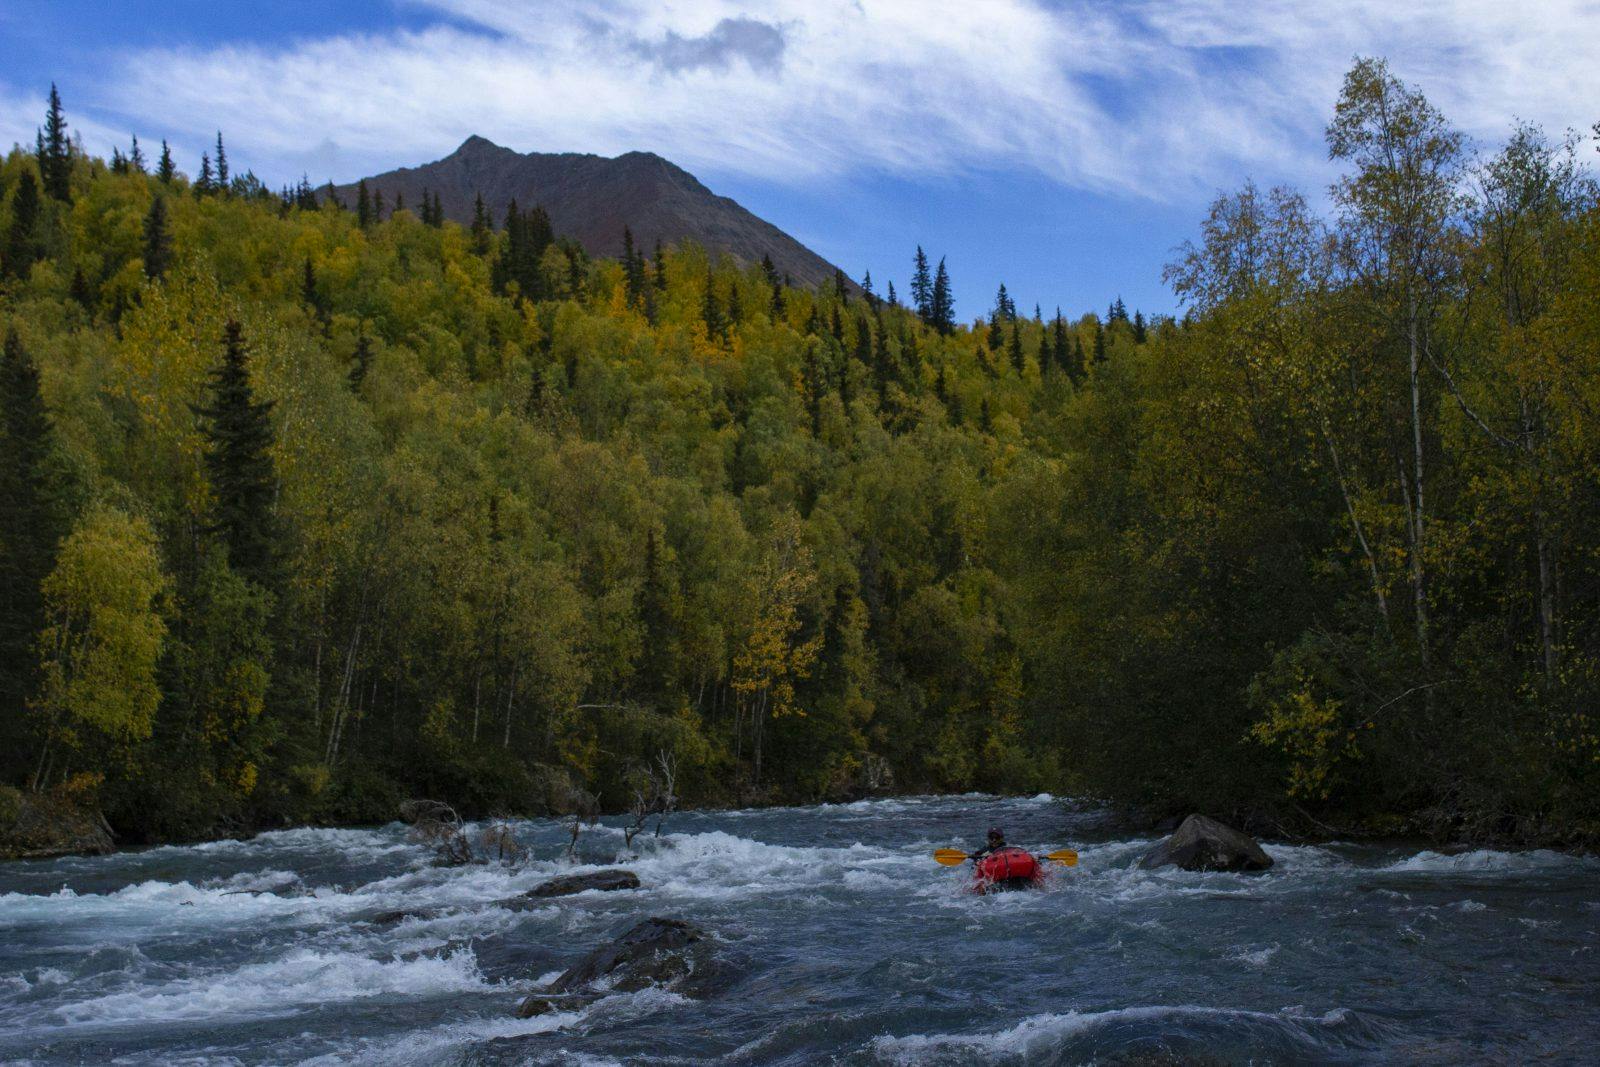 Paul Gabriel on the Tanalian River in search of a place to put a temperature logger. Photo by: Sam Carter